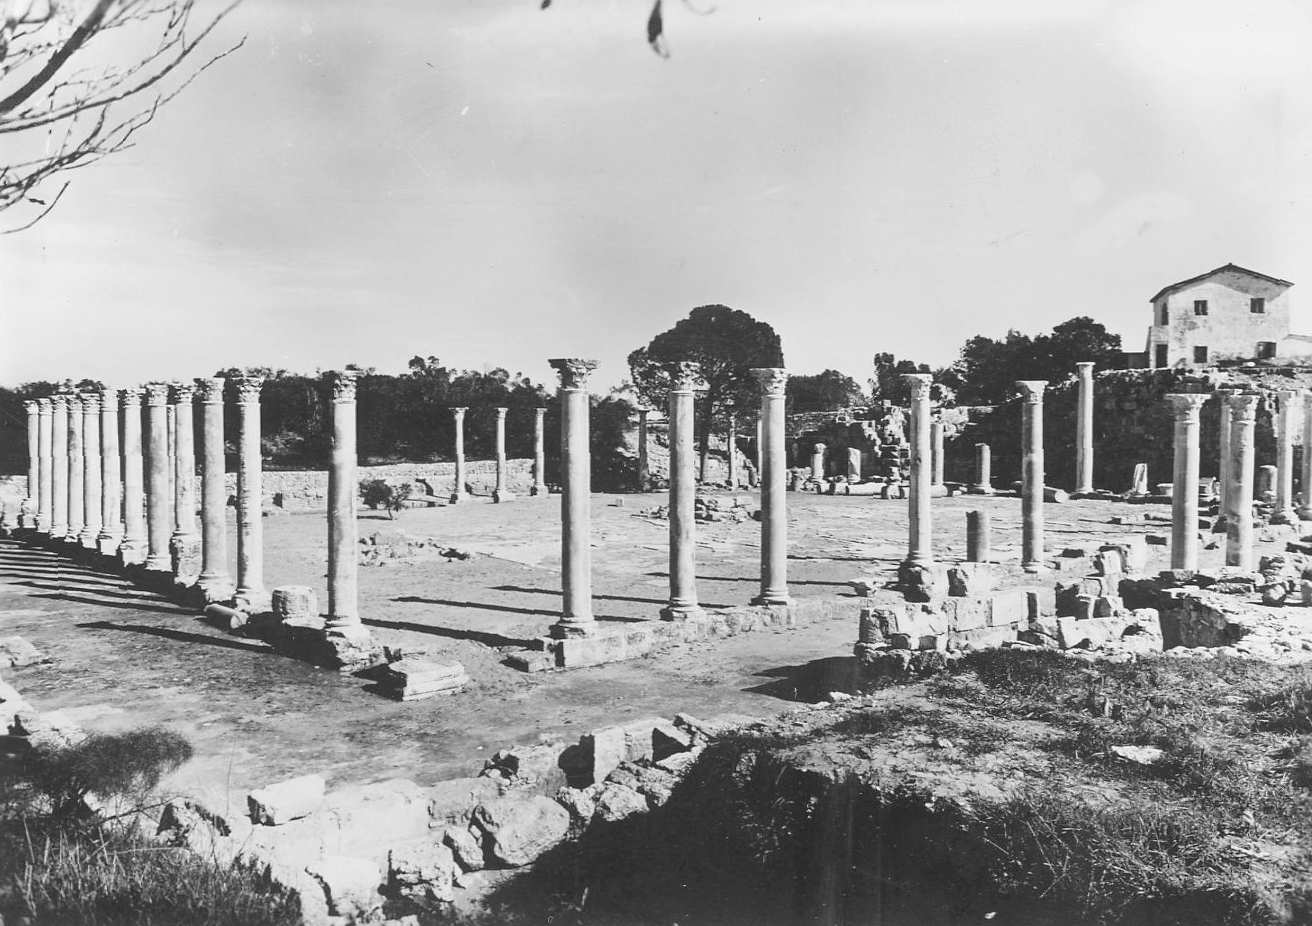 Excavating at Salamis in Cyprus, 1952-1974: 34 years later